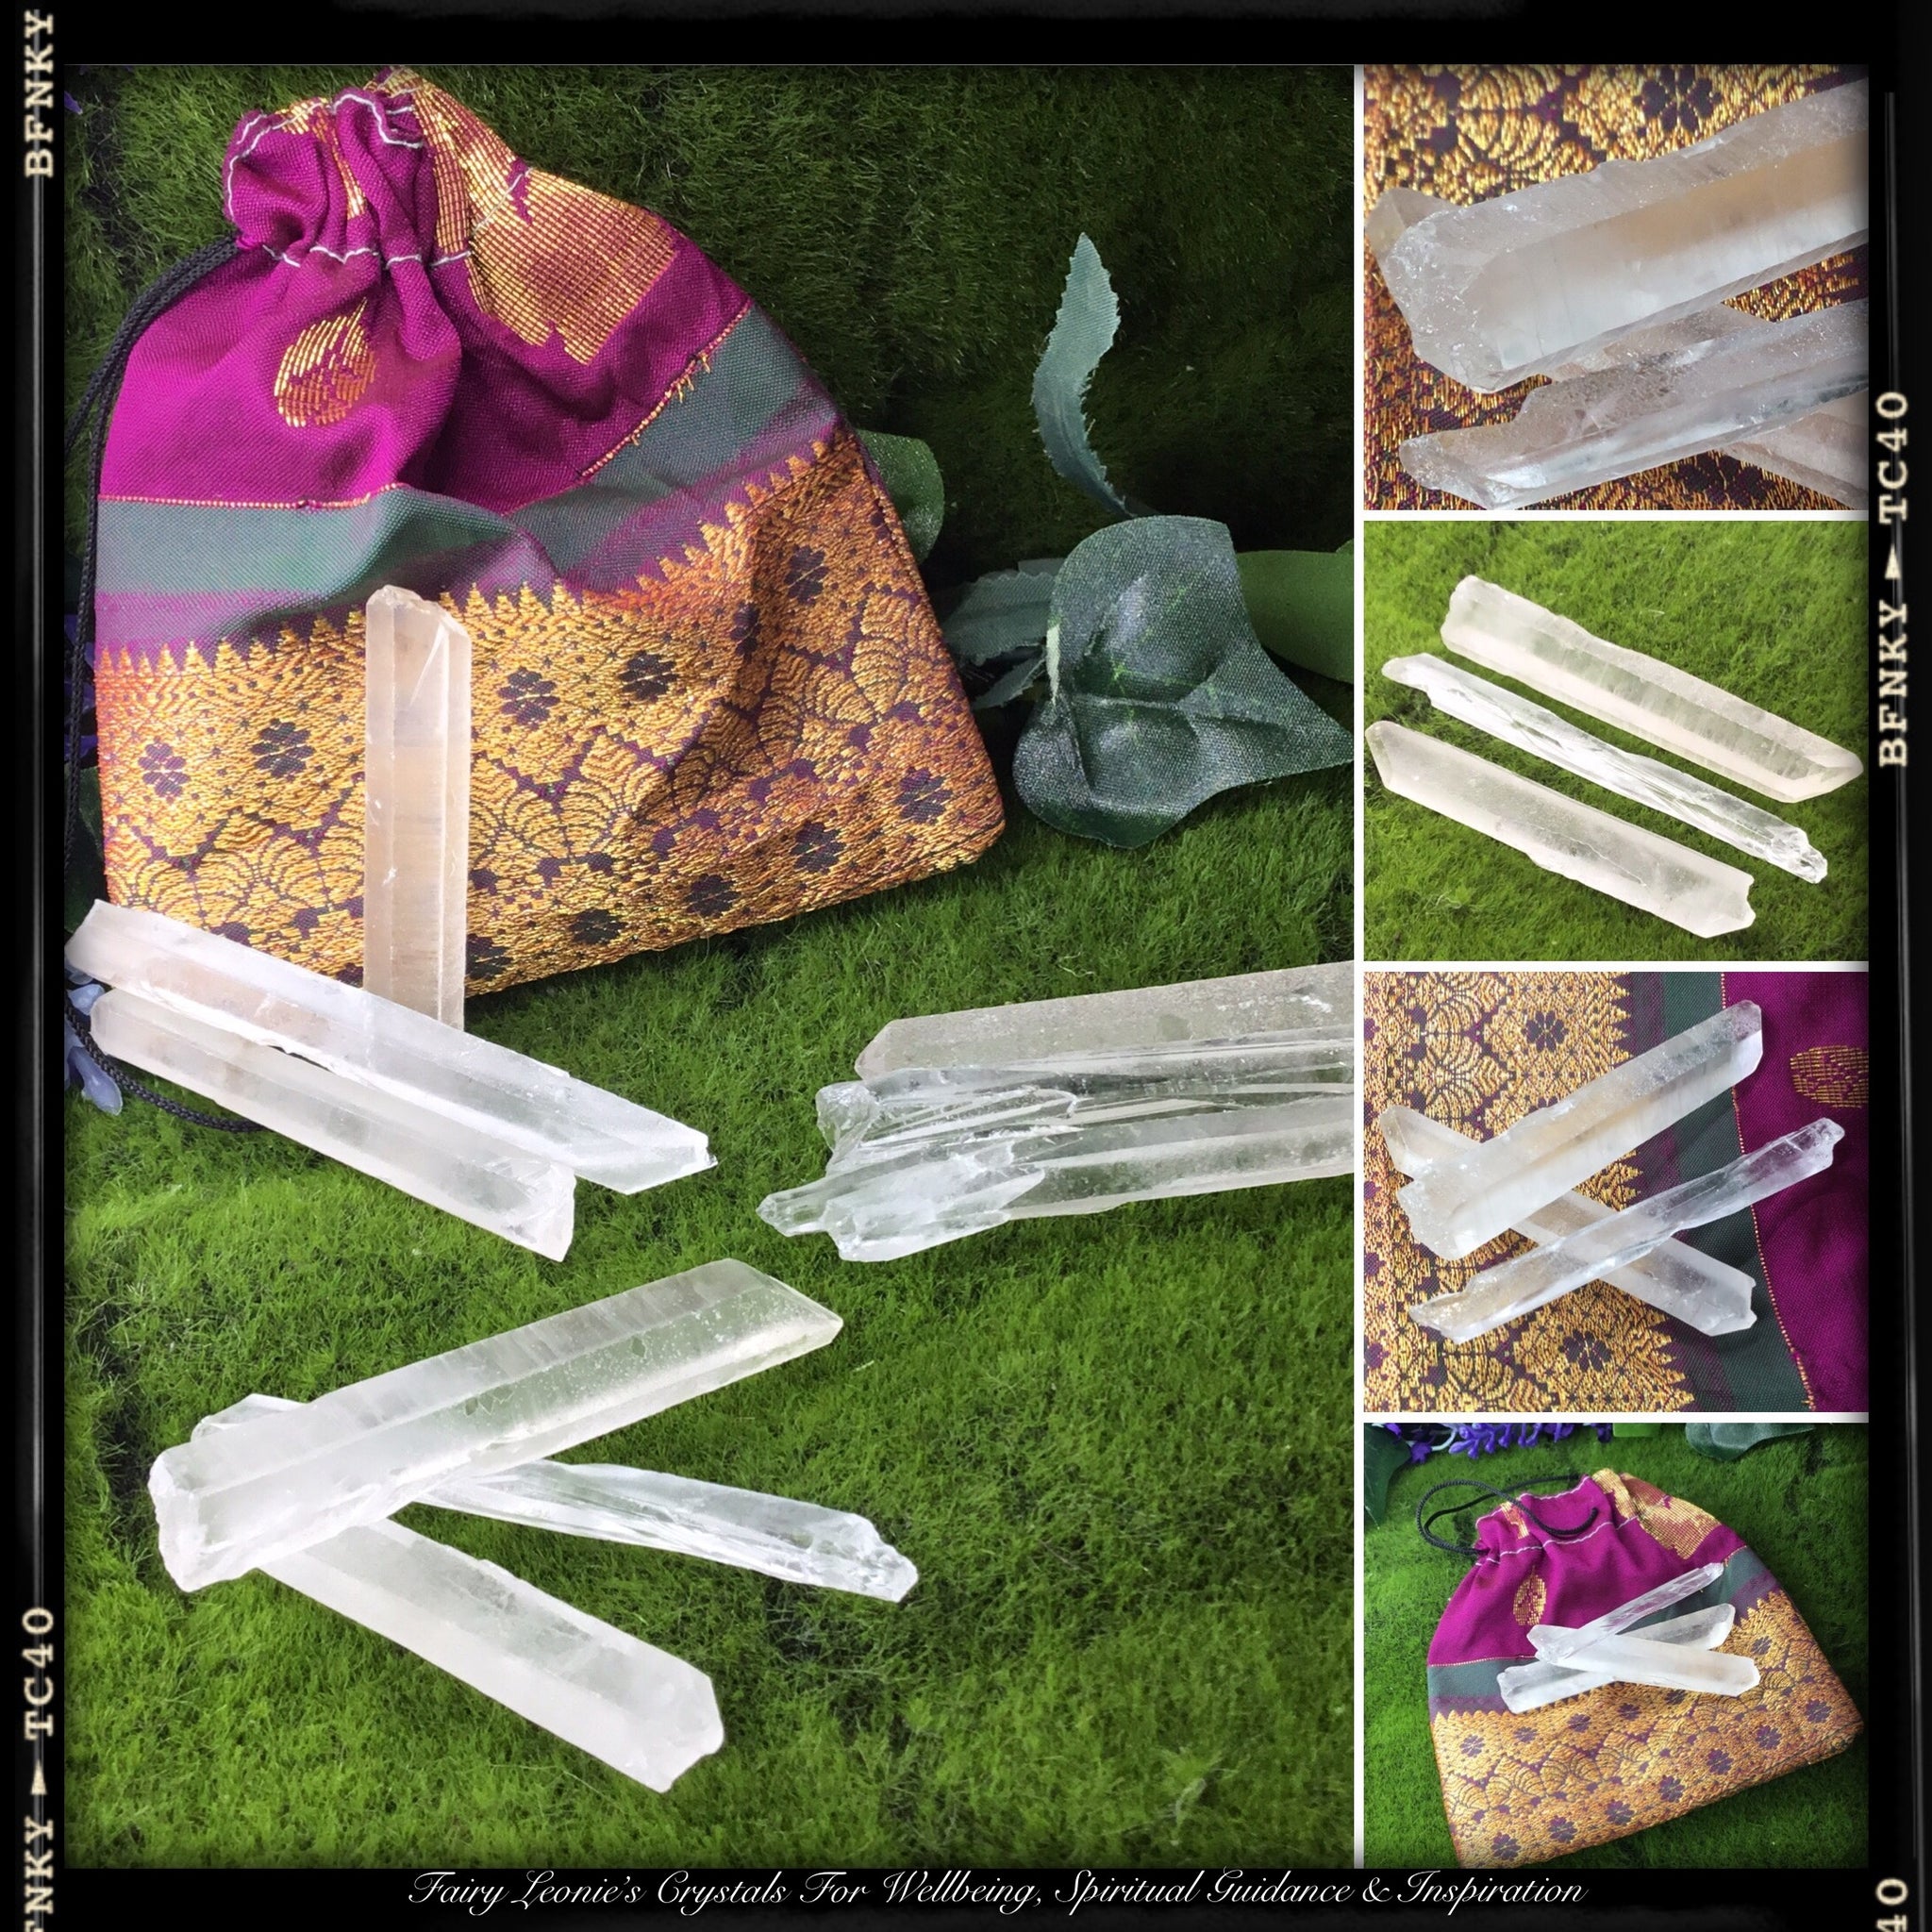 Crystals for Healing.  RAISE THE VIBRATION. Lemurian Singing Crystal Kit. Energy tool